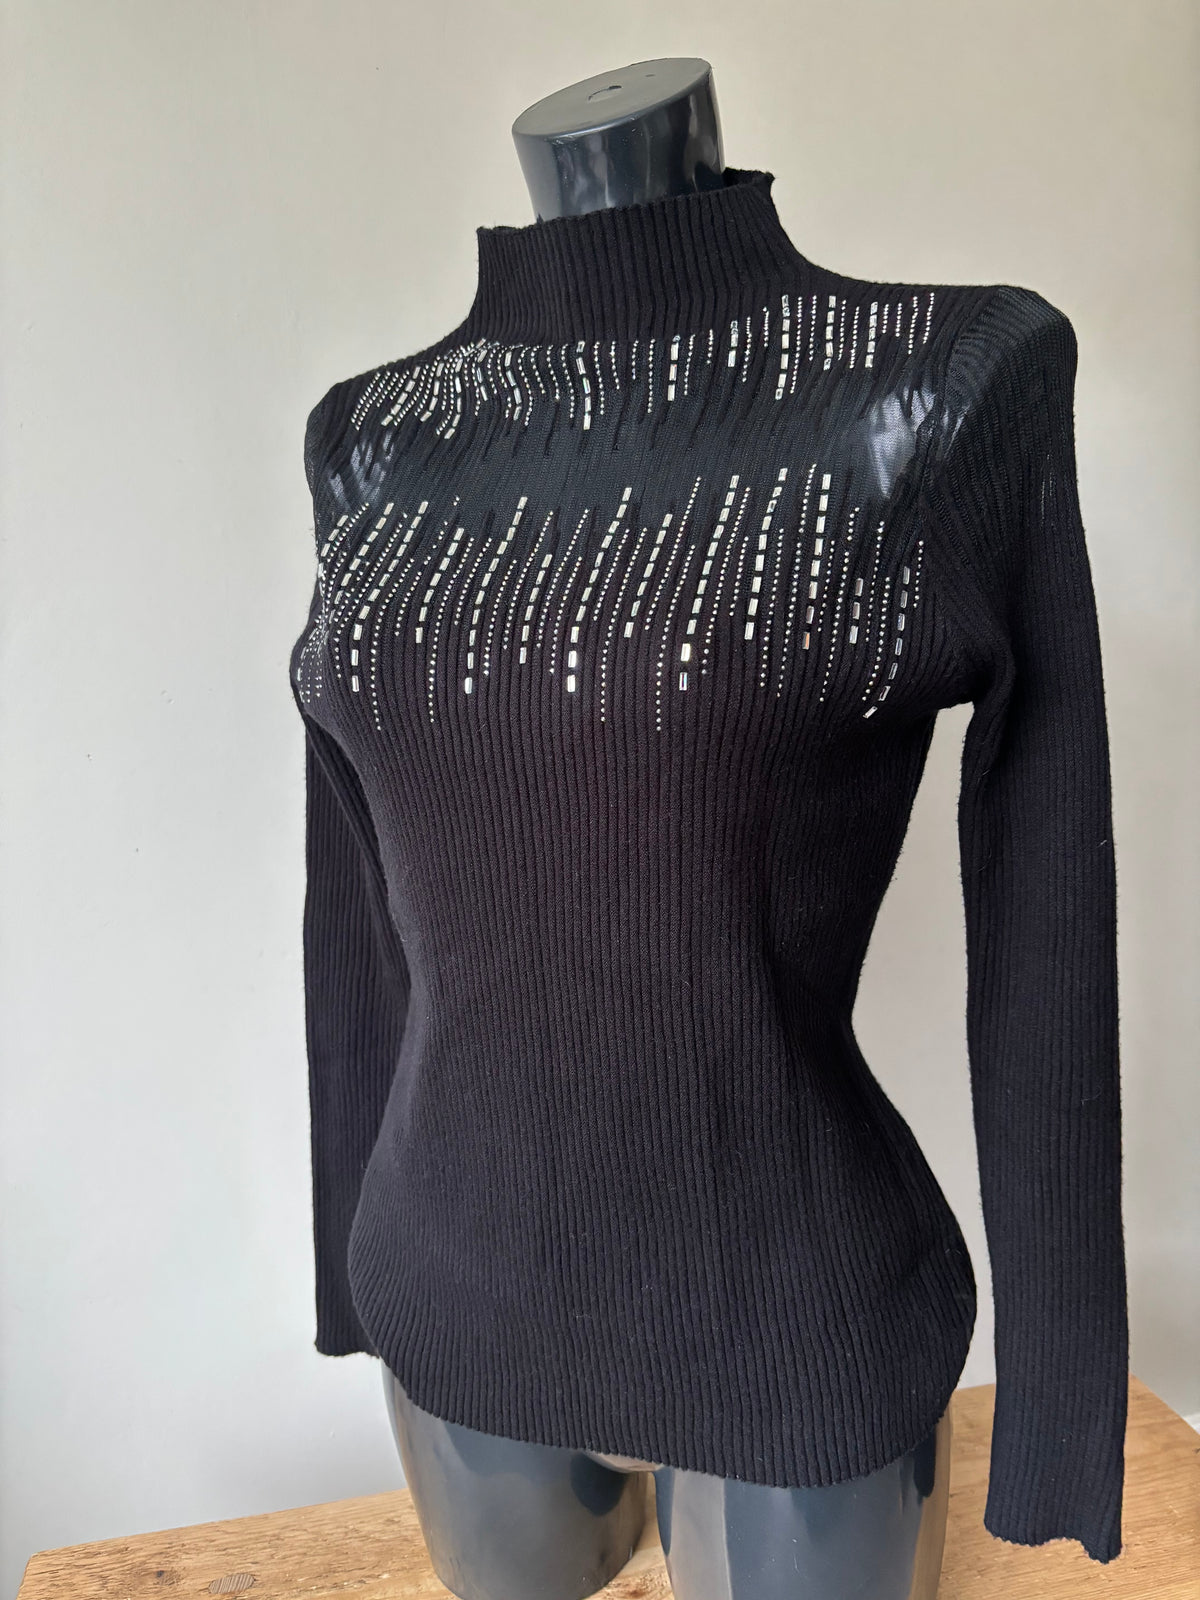 Black Knitted Diamante High Neck Jumper by Quiz Size 16